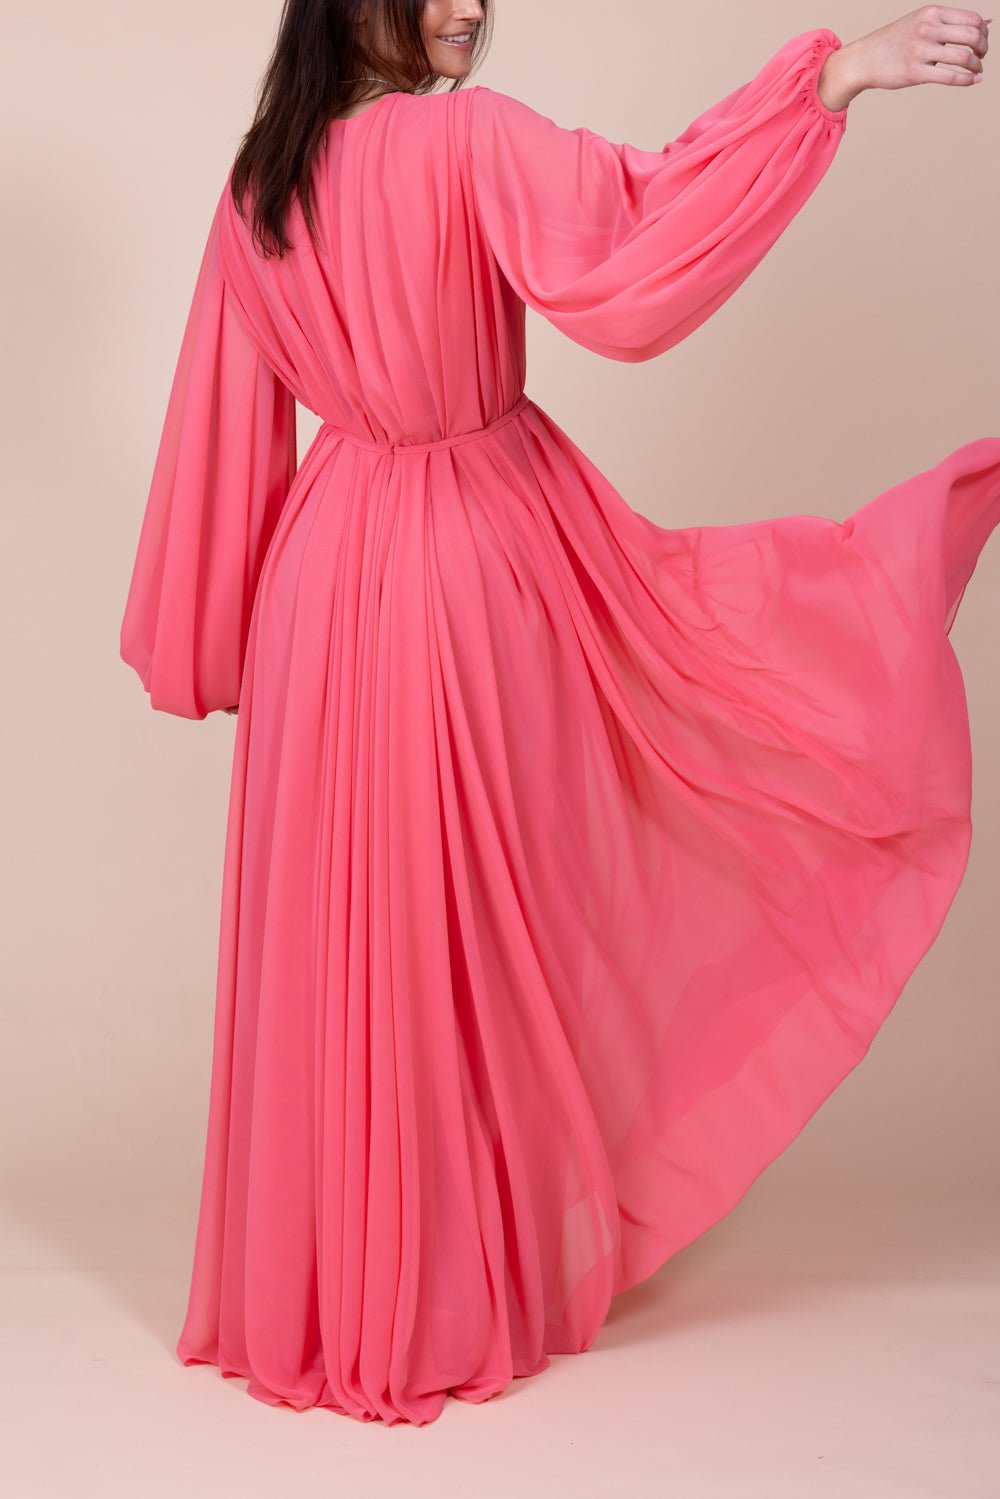 Bubble Sleeve Gown - Stawberry CLOTHINGDRESSGOWN REEM ACRA   